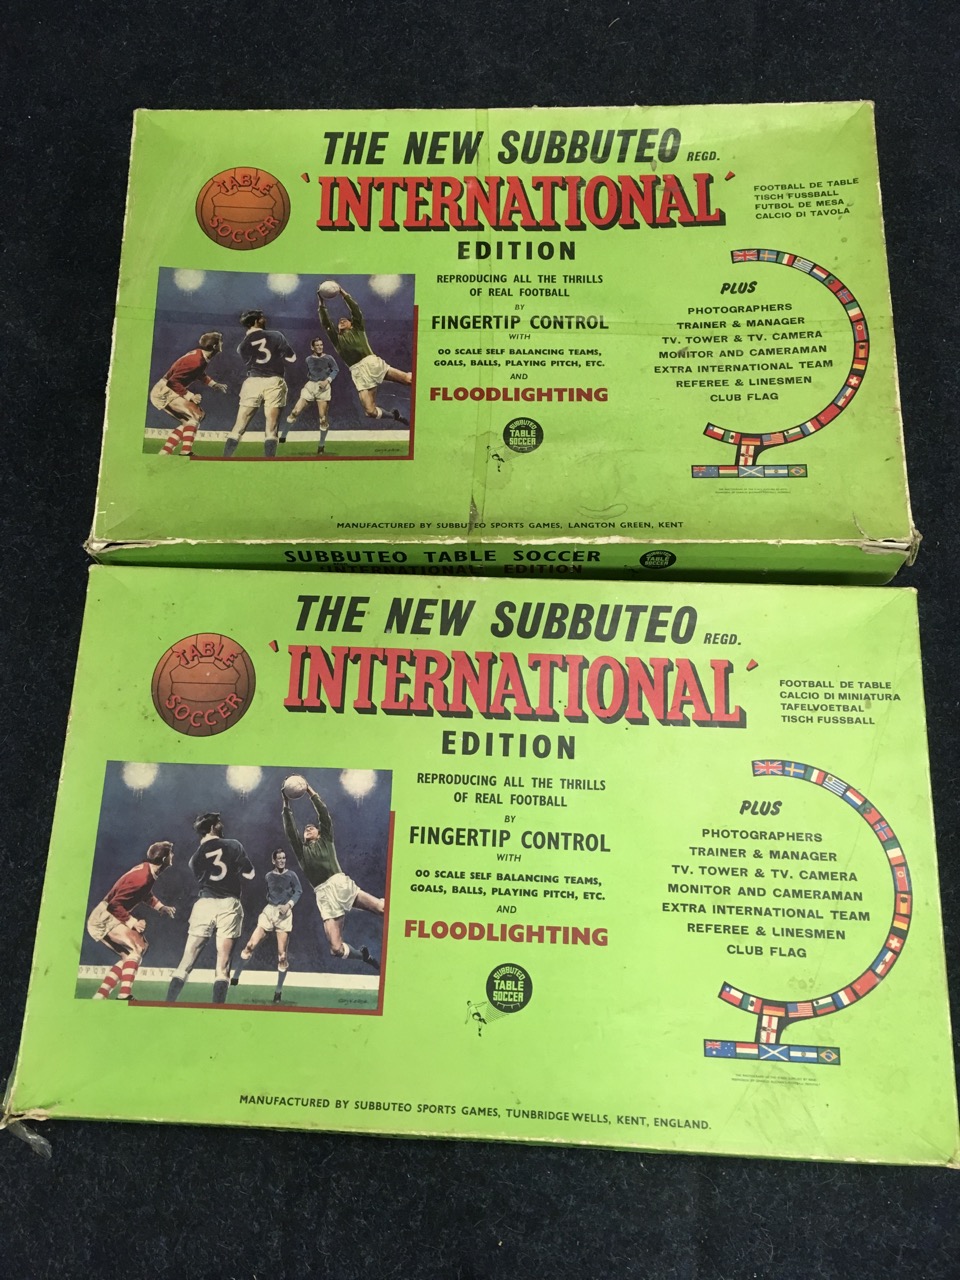 Subbuteo International Edition, two boxes with figures, cloths, goalposts, etc - incomplete. (2) - Image 2 of 6